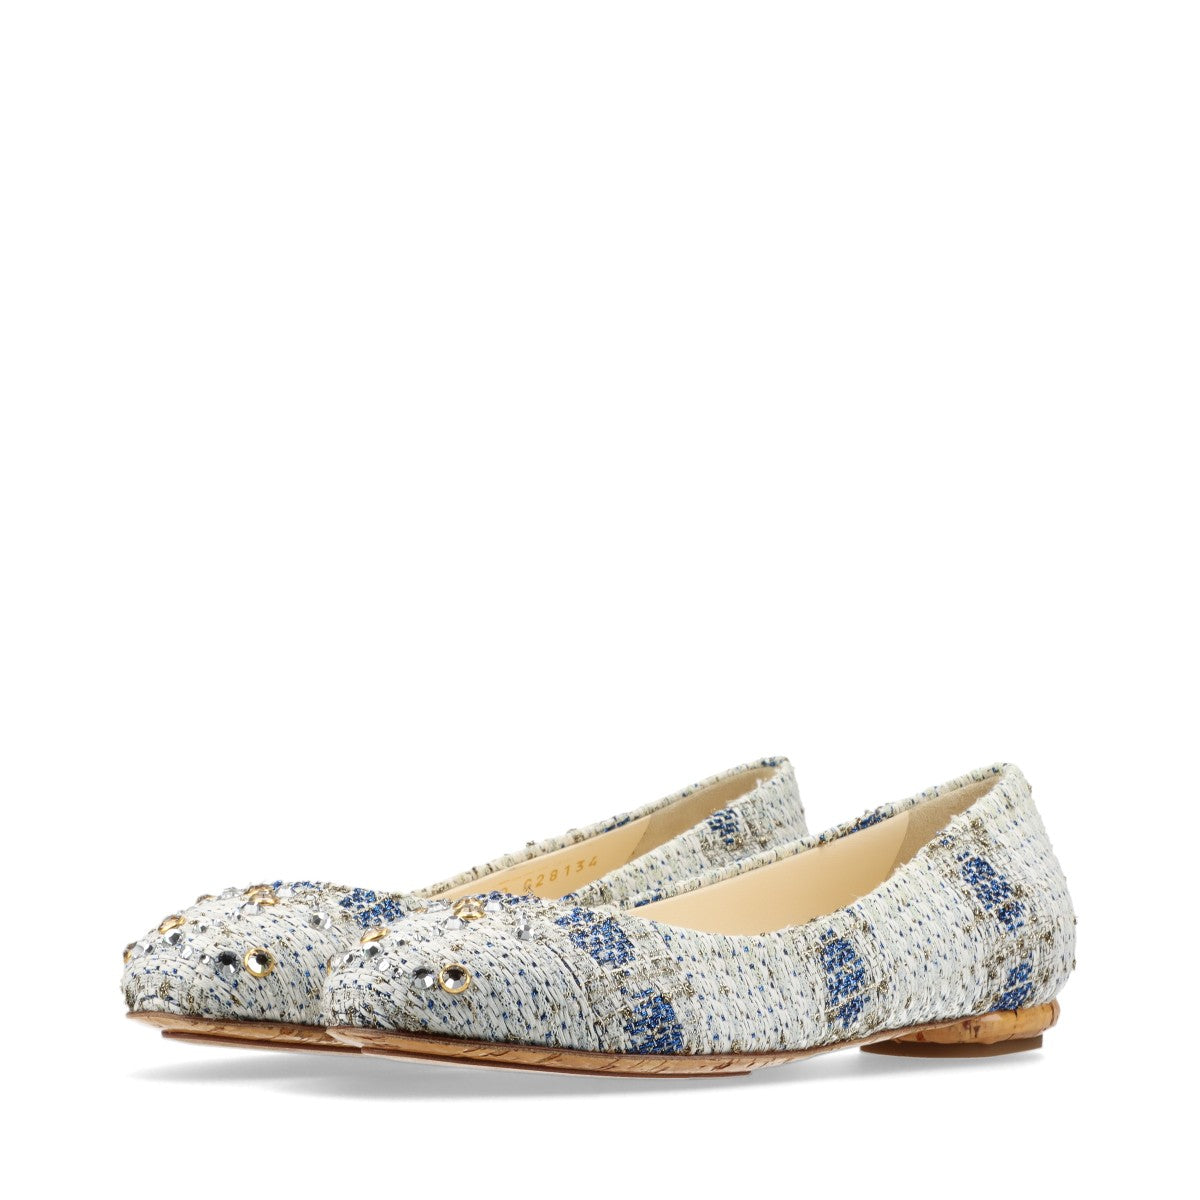 Chanel Coco Mark Leather x fabric Flat Pumps 36.5C Ladies' Blue x white G28134 Tweed Rhinestone There is a box